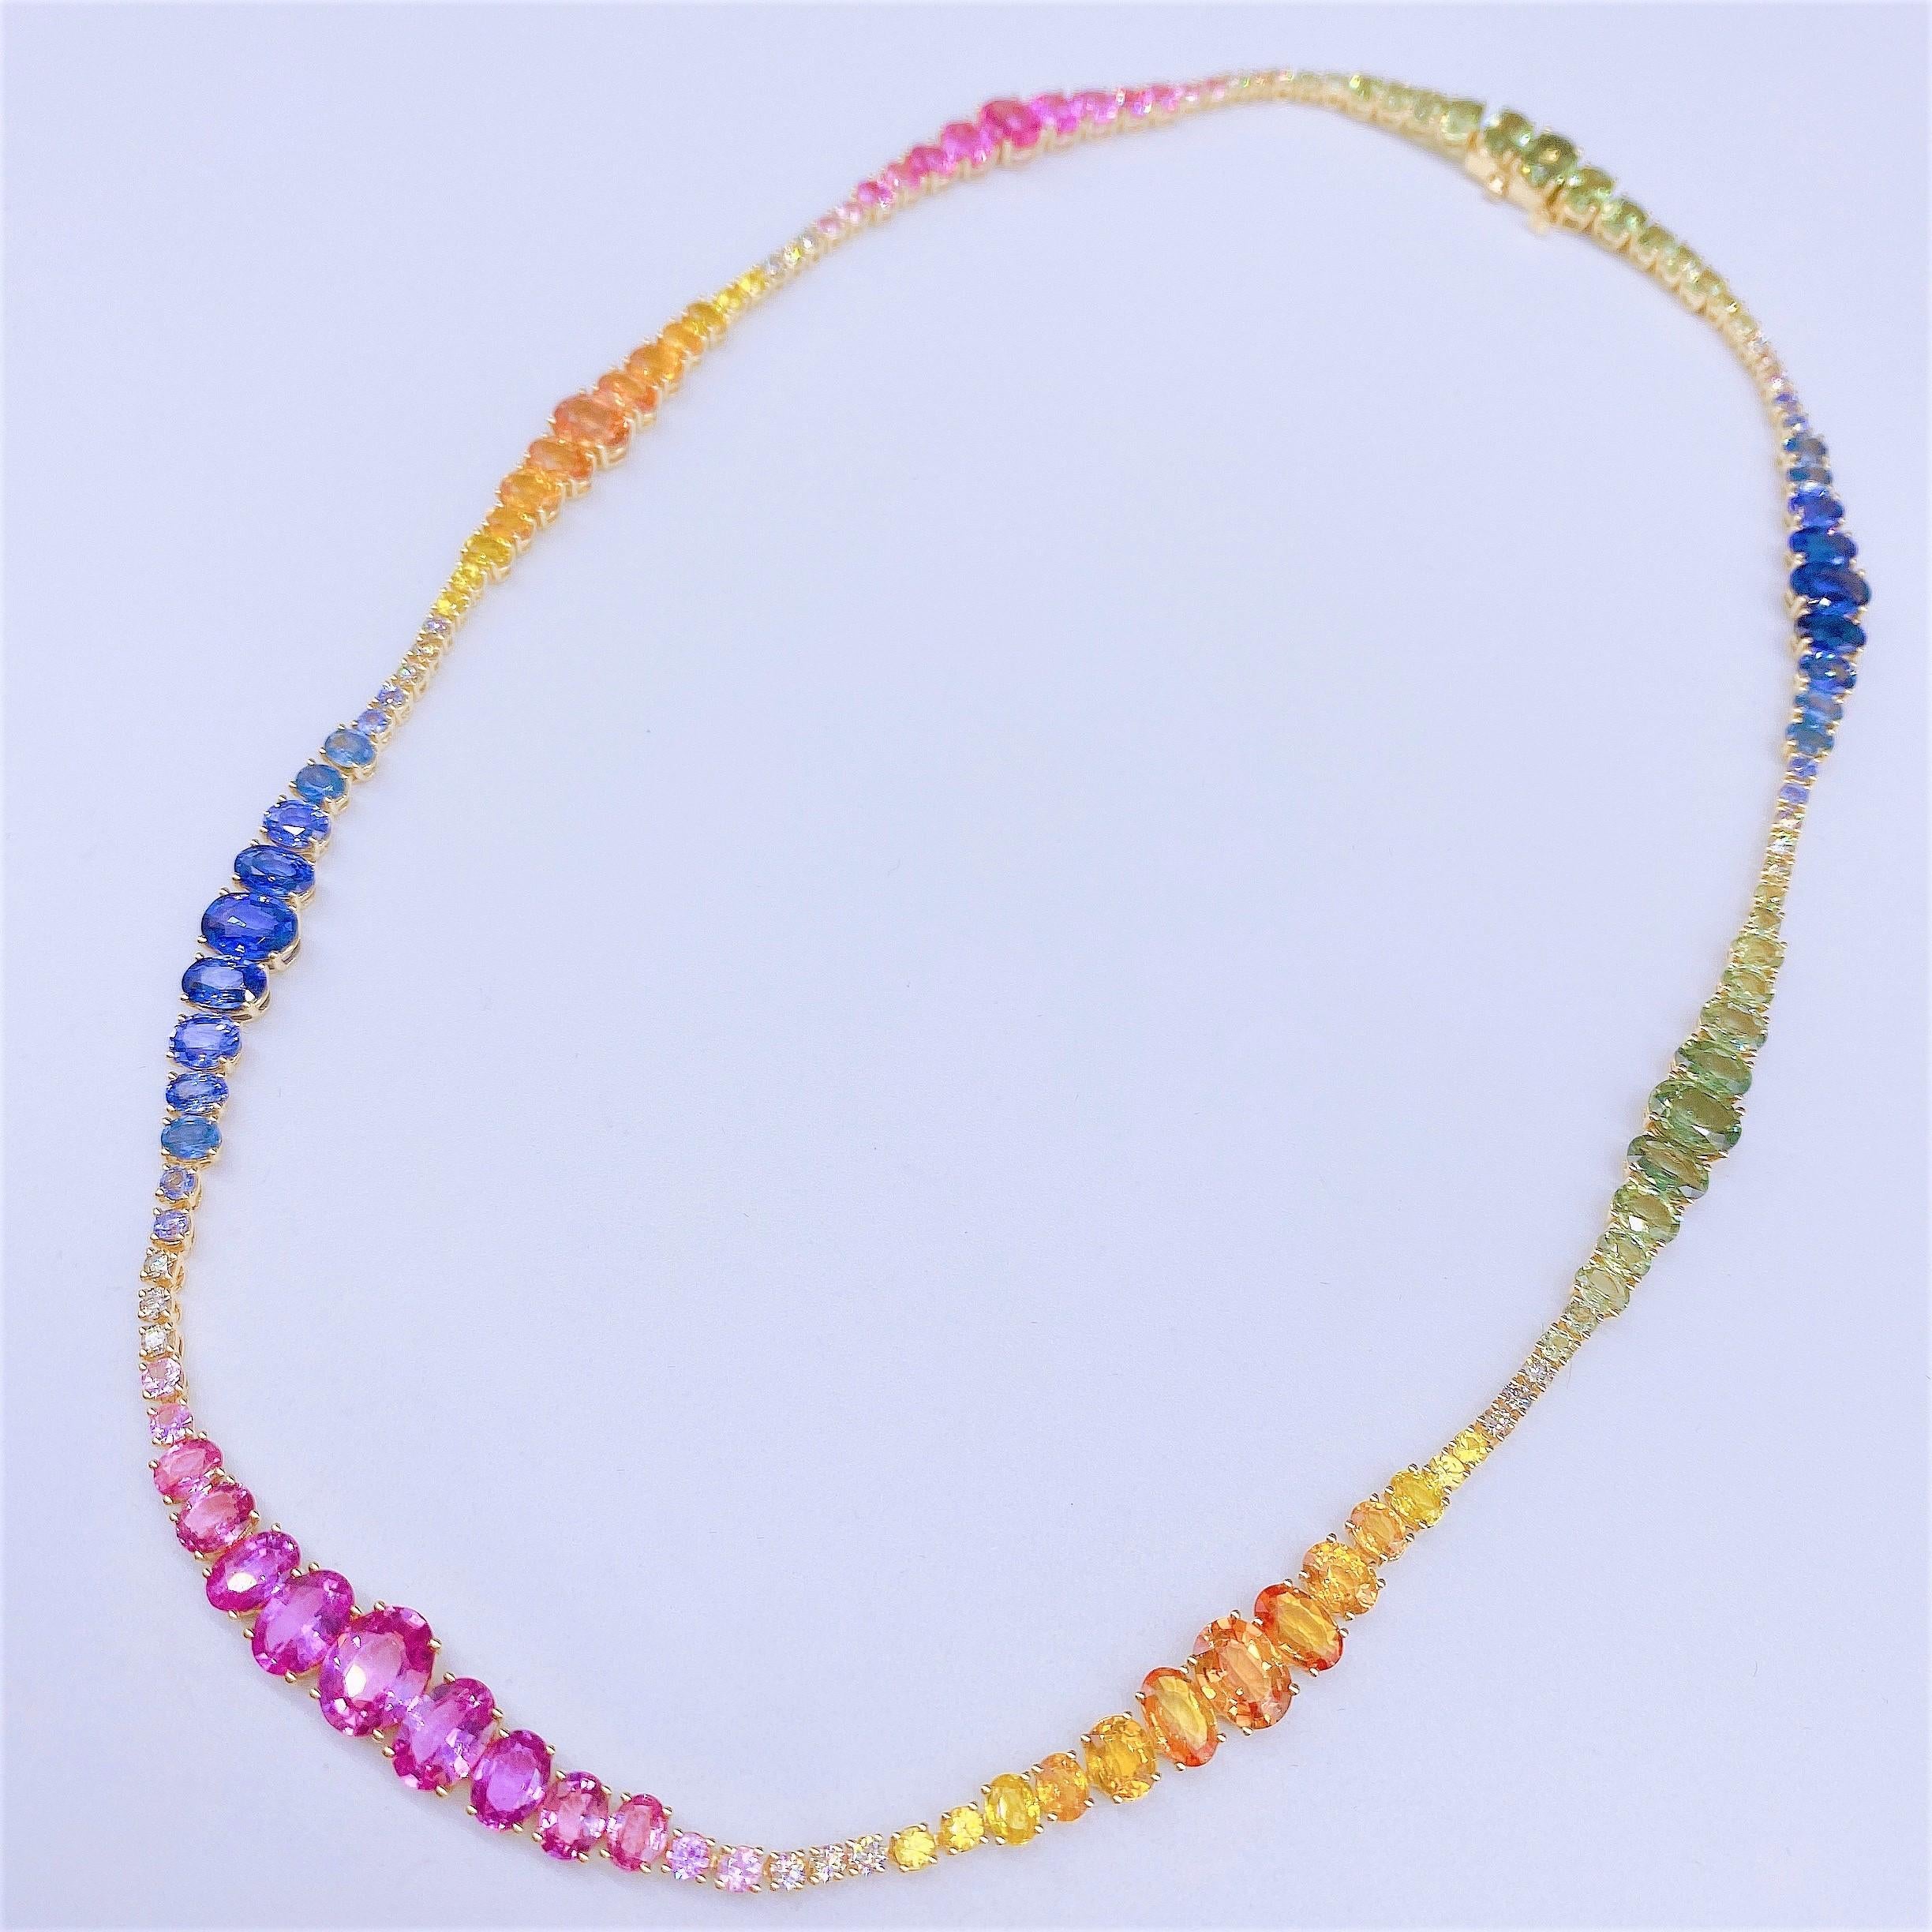 The Following Item we are offering is this Rare Important FANCY MULTI RAINBOW SAPPHIRE AND DIAMOND GOLD NECKLACE!!! Necklace consists of the Most Exquisite Shades of Rainbow Sapphires and Gorgeous Glittering Diamonds set in 18KT Gold!! Total Carat